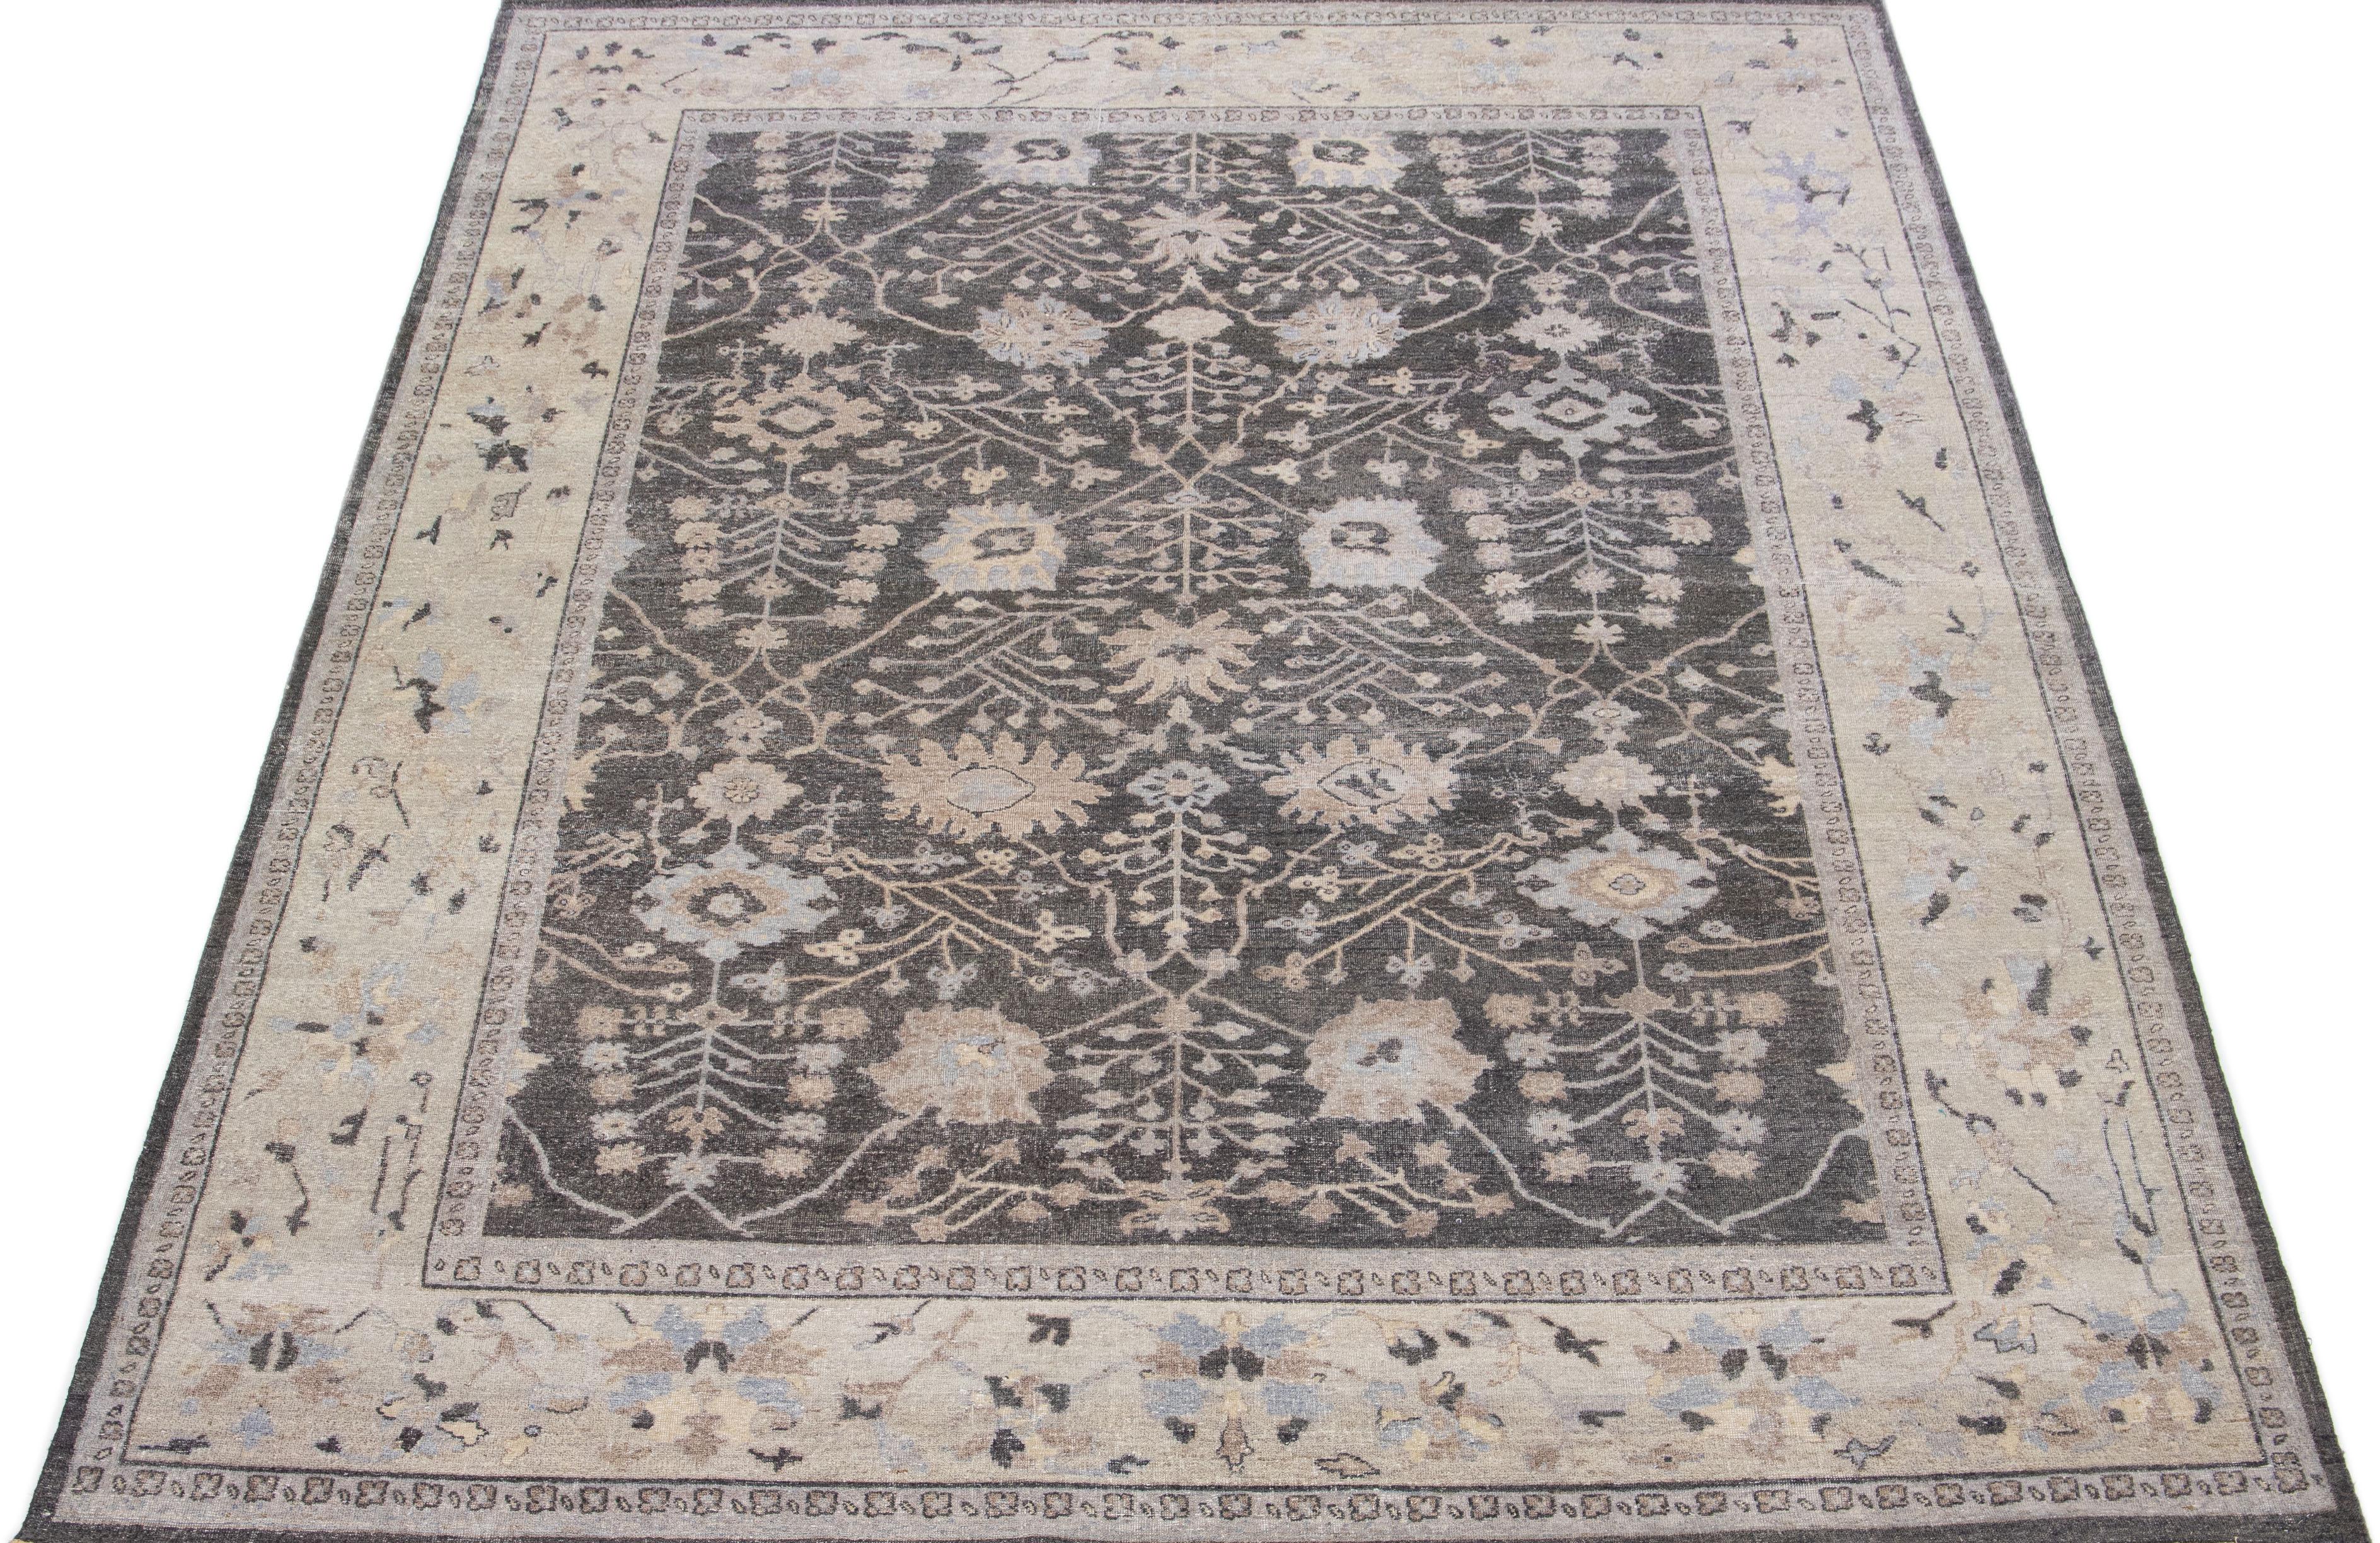 Apadana's artisan line is an antique rug reimaging with an elegant way to inject a striking antique aesthetic into a space. This line of rugs is decidedly unique and reimagines what an antique rug look can be. Every single piece from our artisan